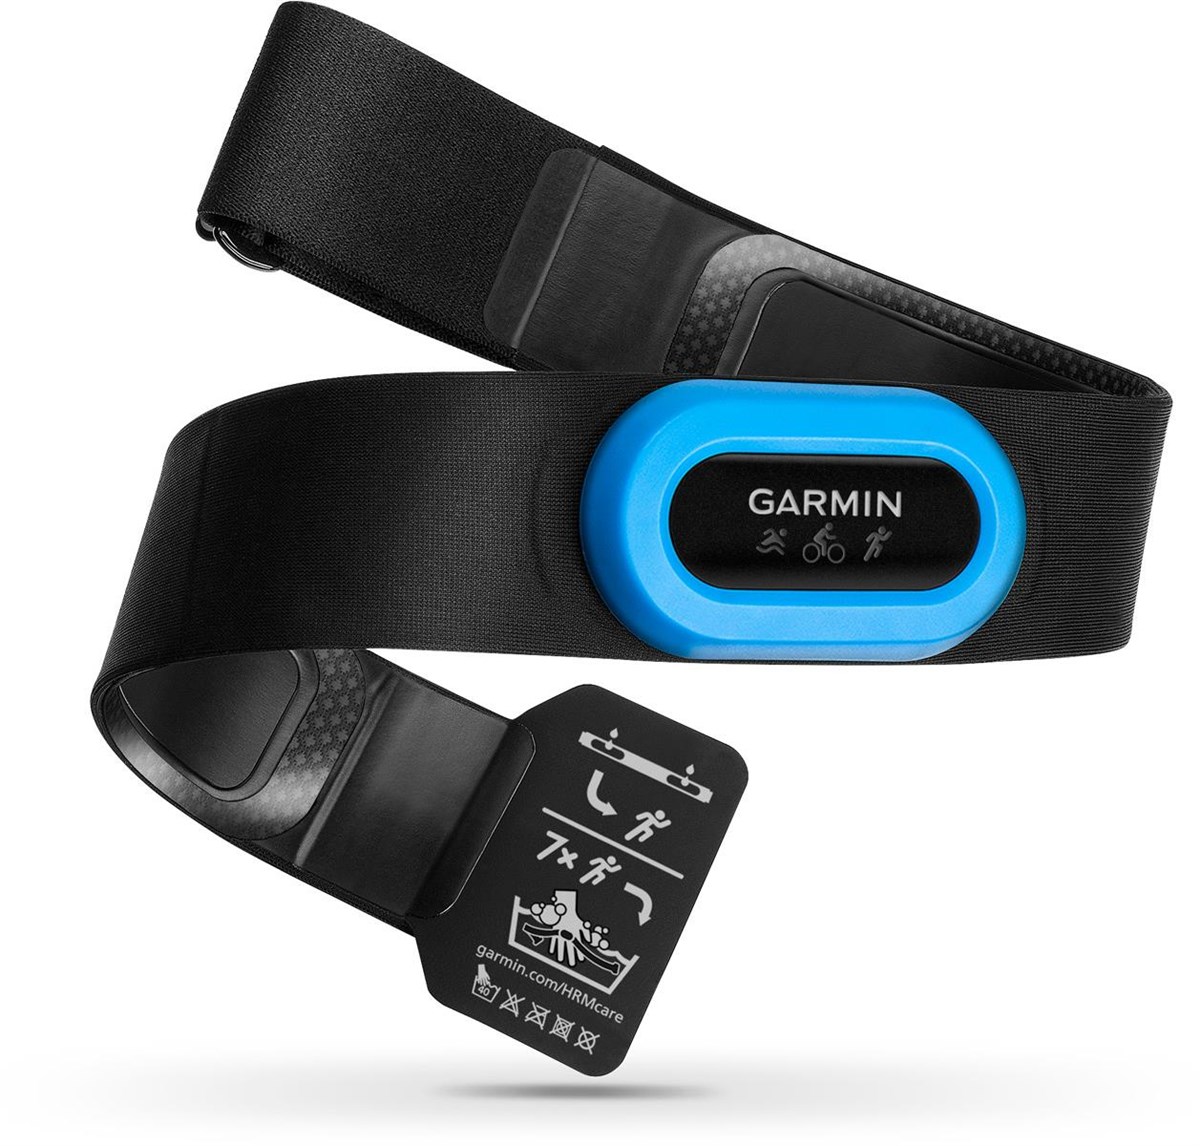 Garmin HRM-Tri Heart Rate Transmitter - For 920XT and Fenix 3